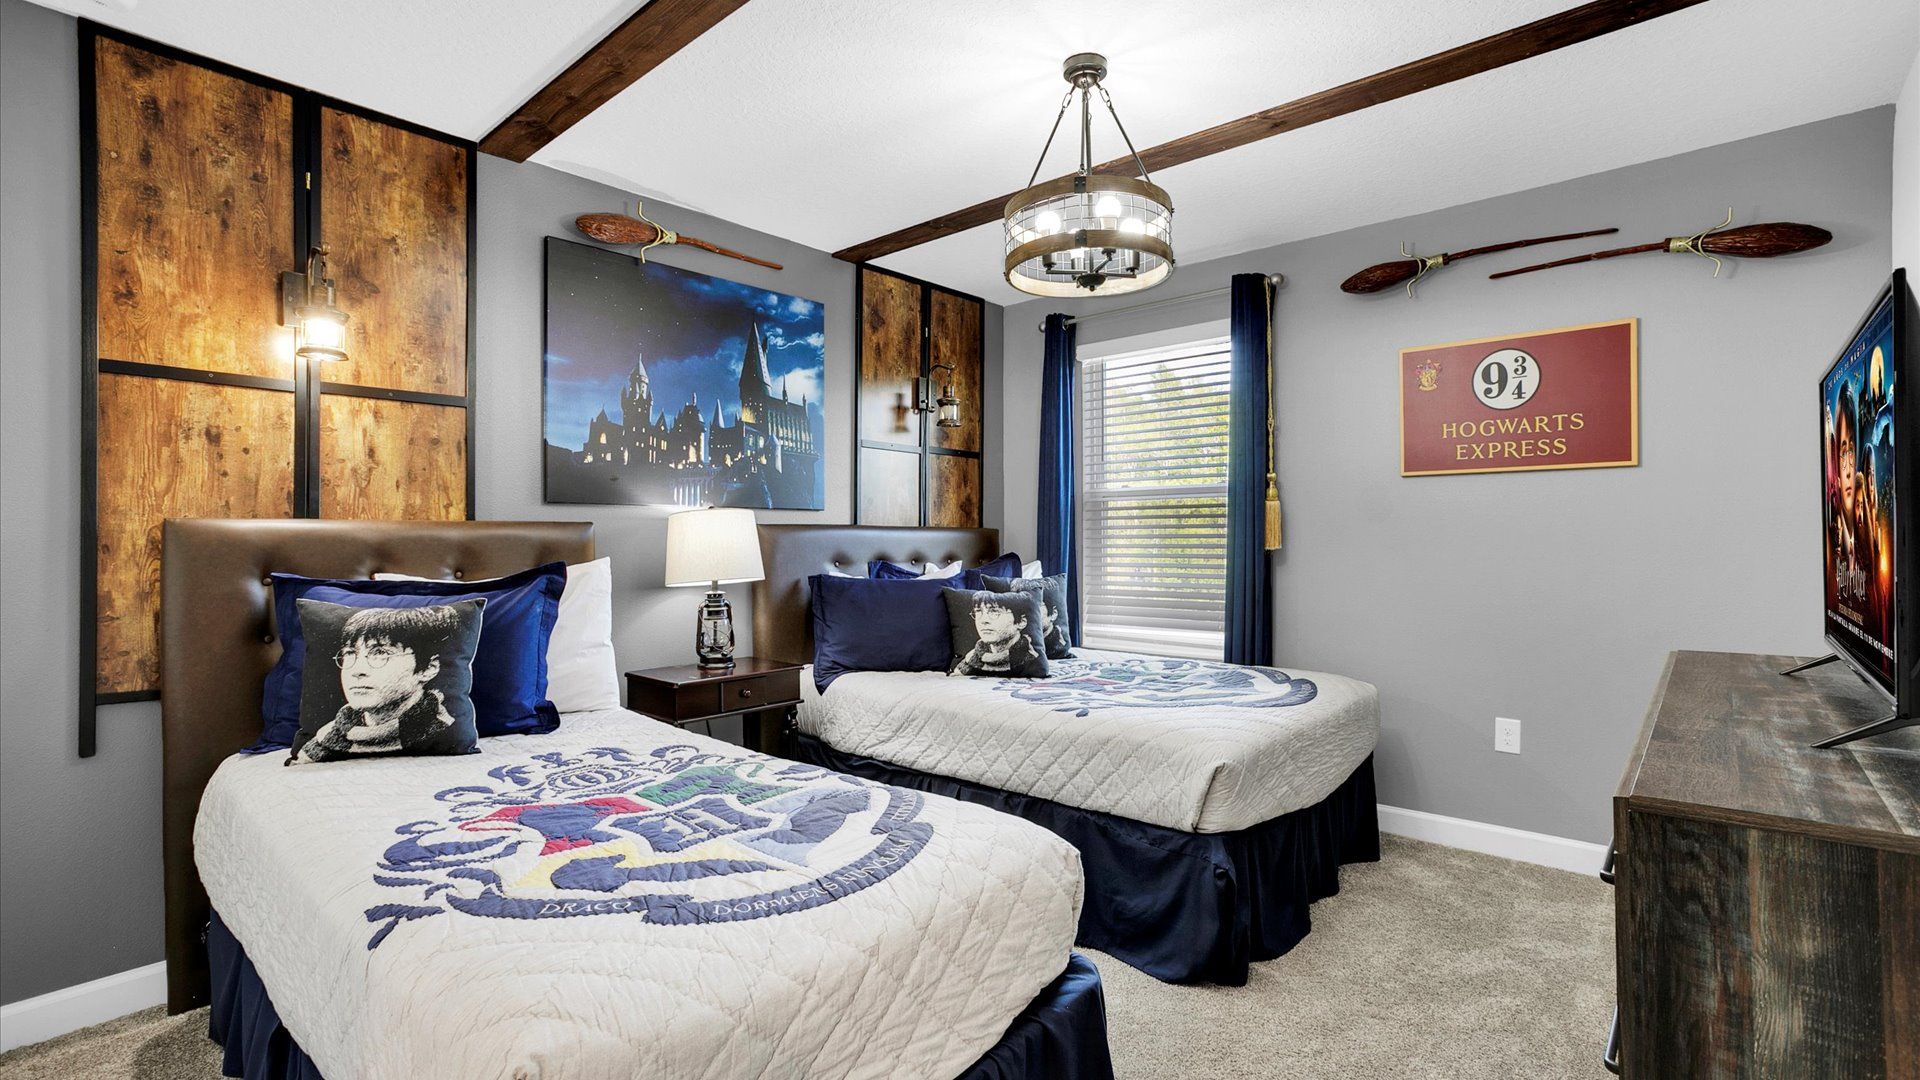 Twin/Double Suite Bedroom 6
Upstairs
Attached Bathroom
Harry Potter Theme